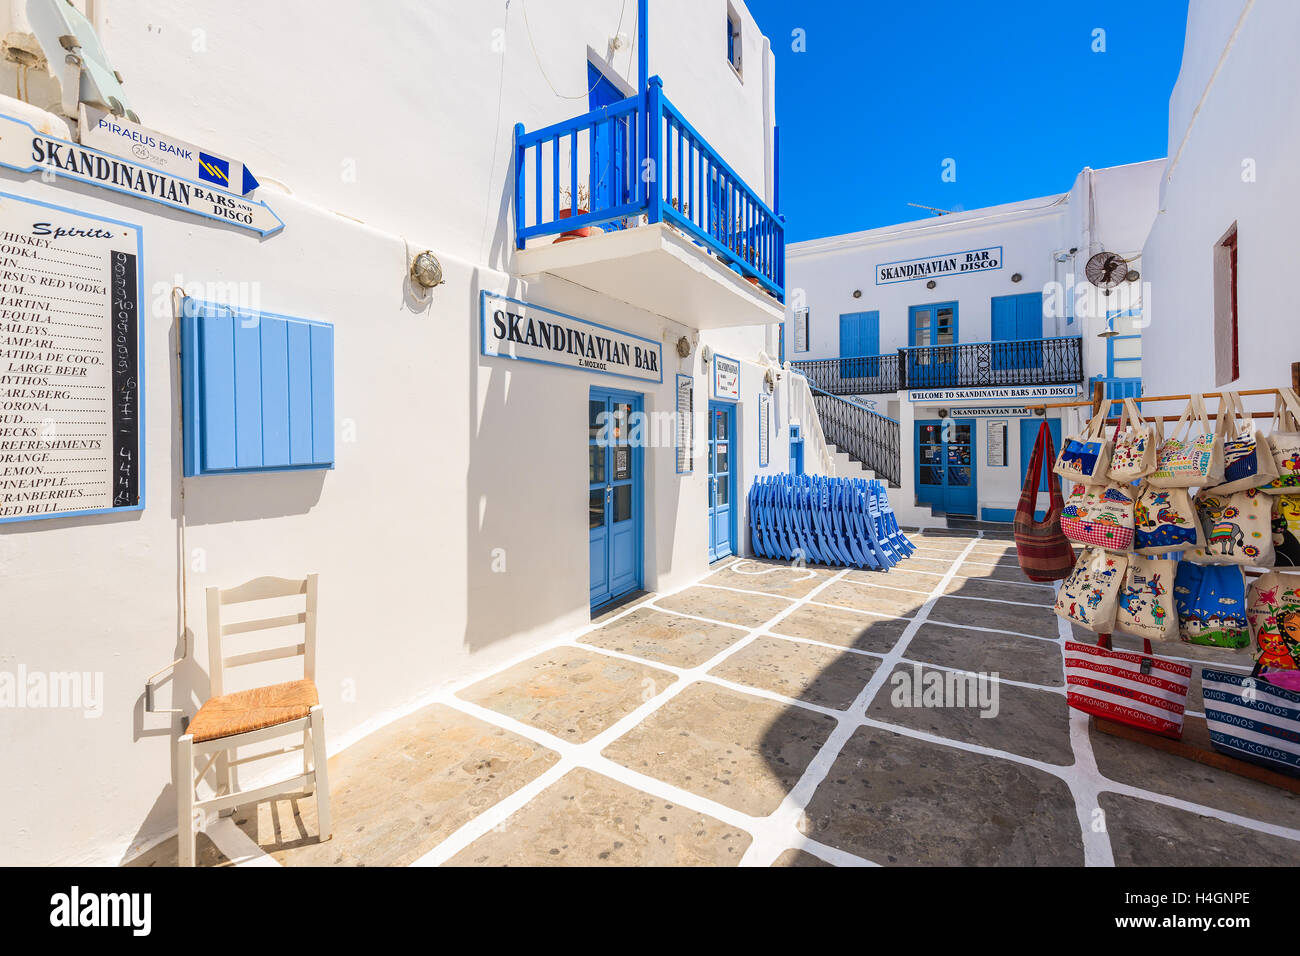 MYKONOS TOWN, GREECE - MAY 16, 2016: typical Greek bar and shop with tourist souvenir on street in Mykonos town, Greece. Stock Photo